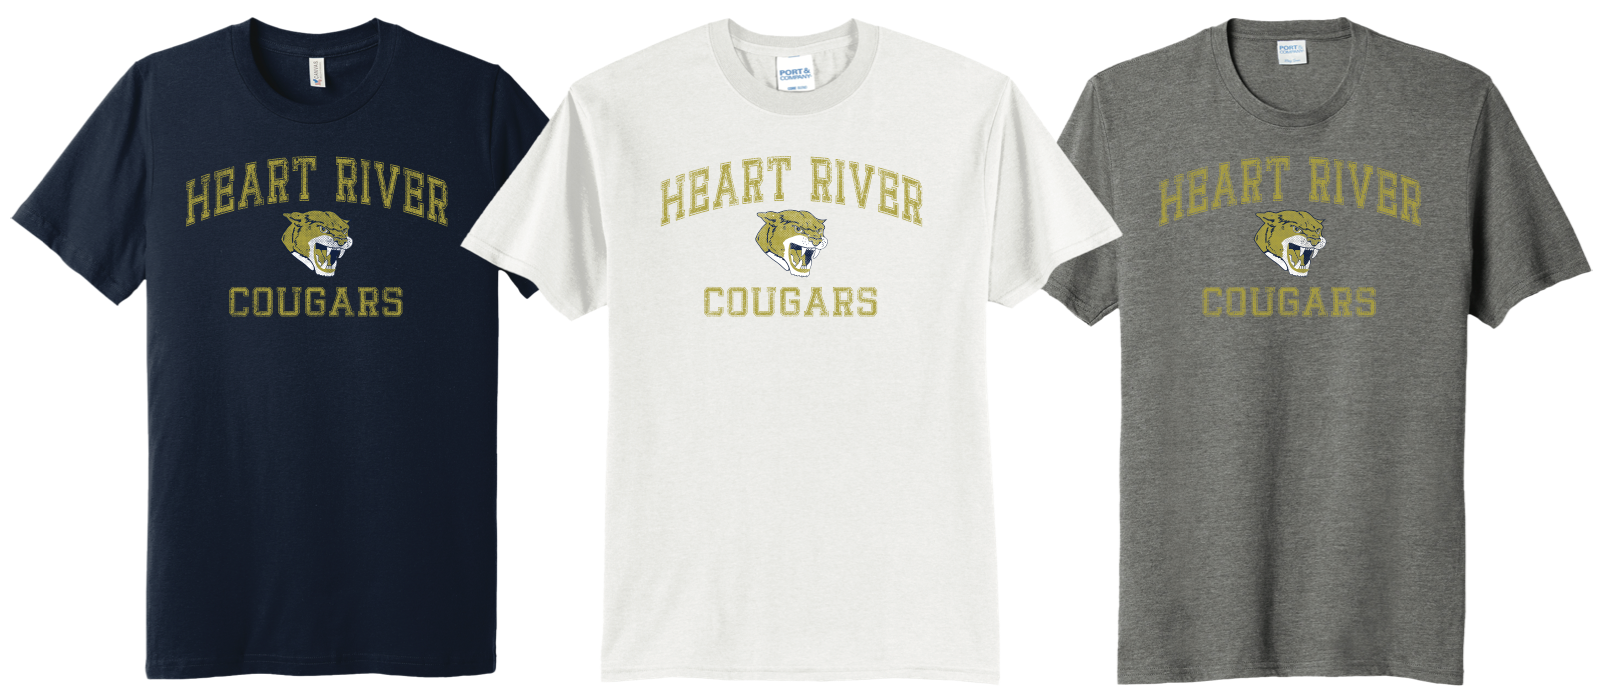 Heart River Cougars